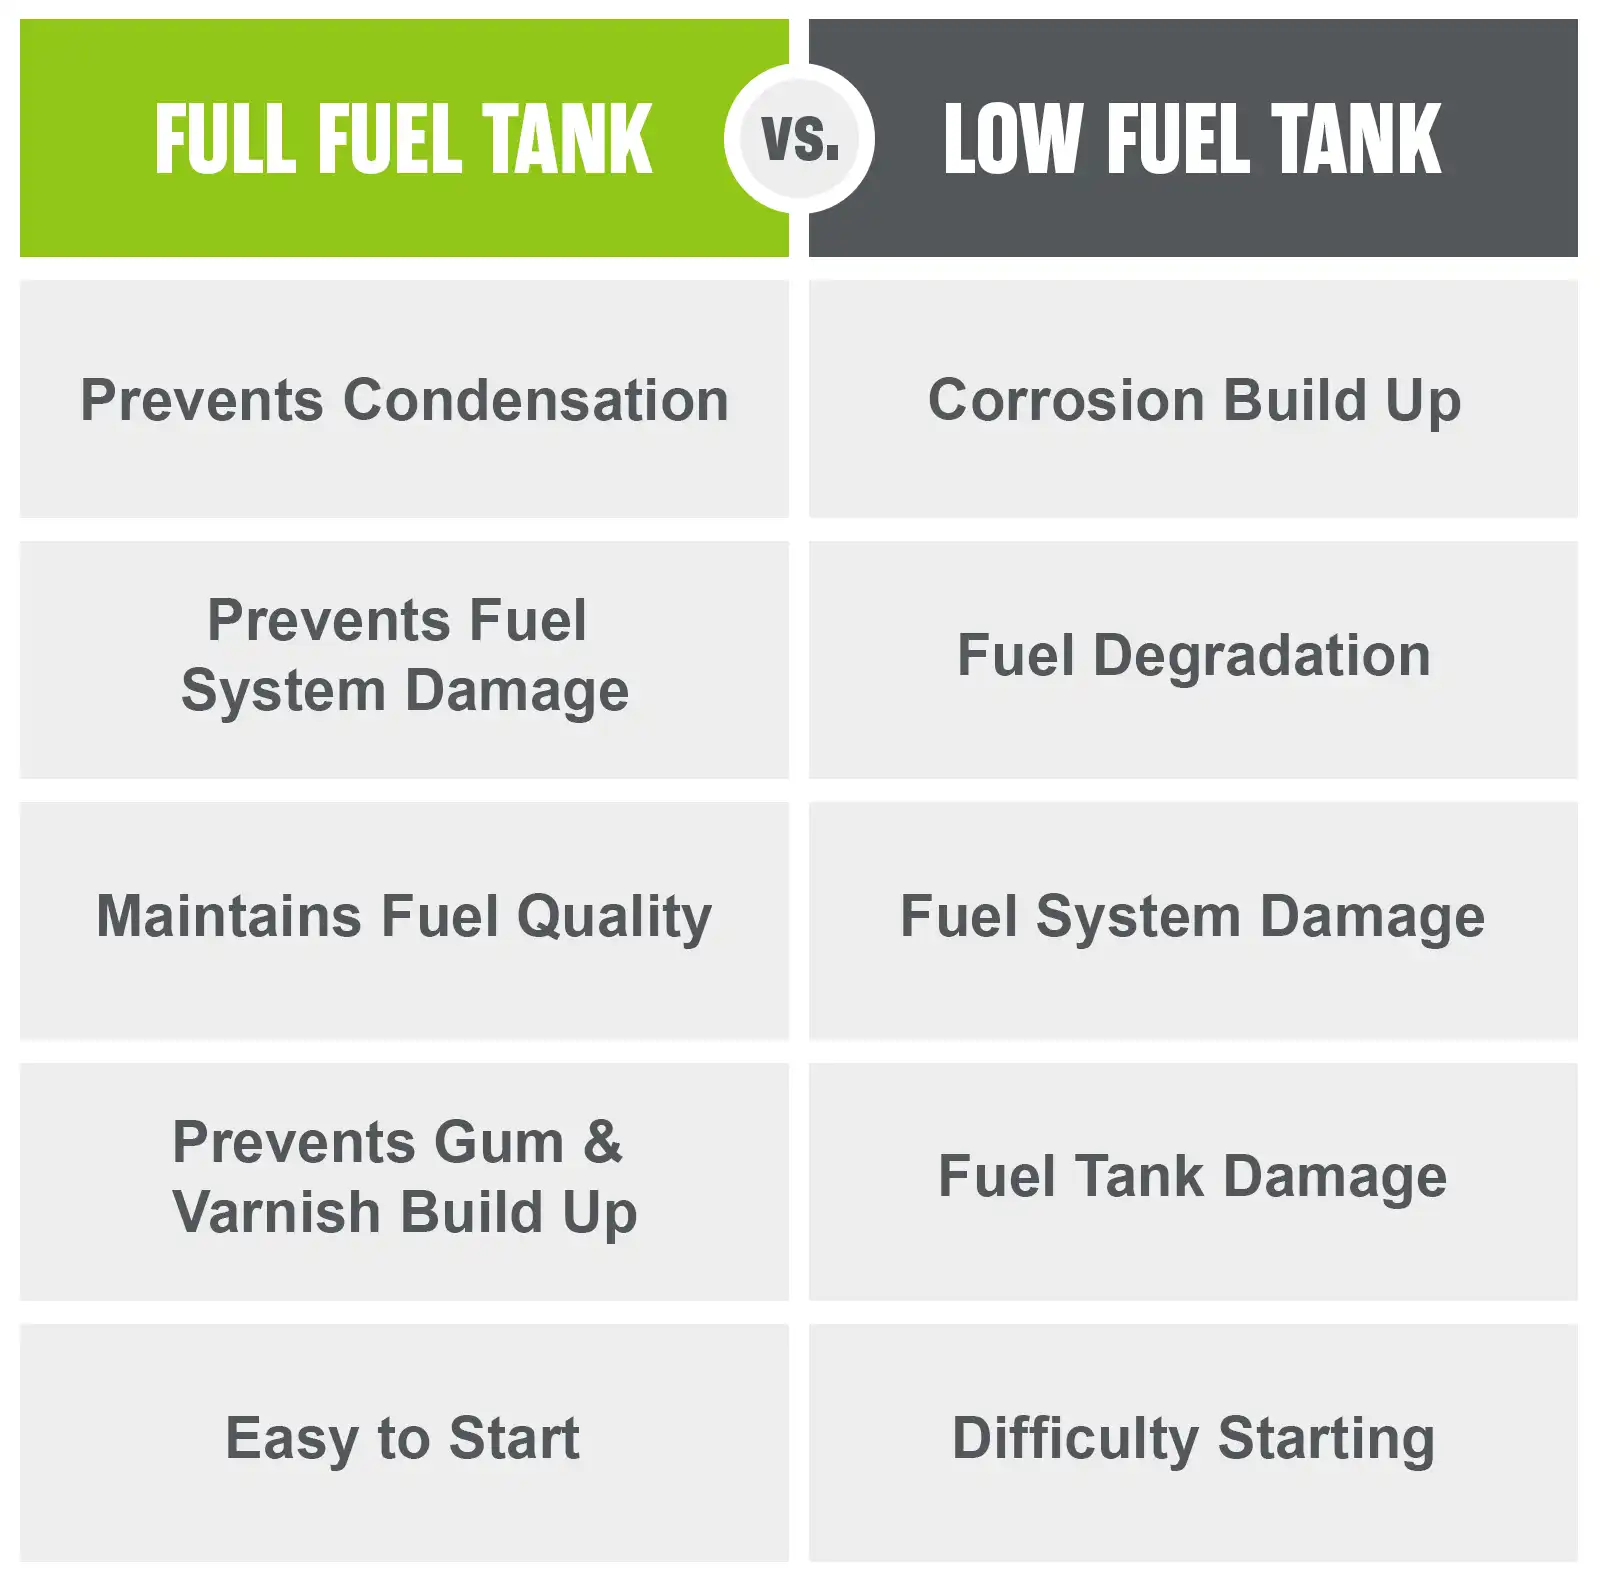 Having a full fuel tank prevents condensation, prevents fuel system damage, maintains fuel quality, prevents gum and varnish buildup, and provides an easier startup. Having a low fuel Level promotes corrosion, fuel degradation, fuel system damage, promotes difficulty starting, and fuel tank damage.